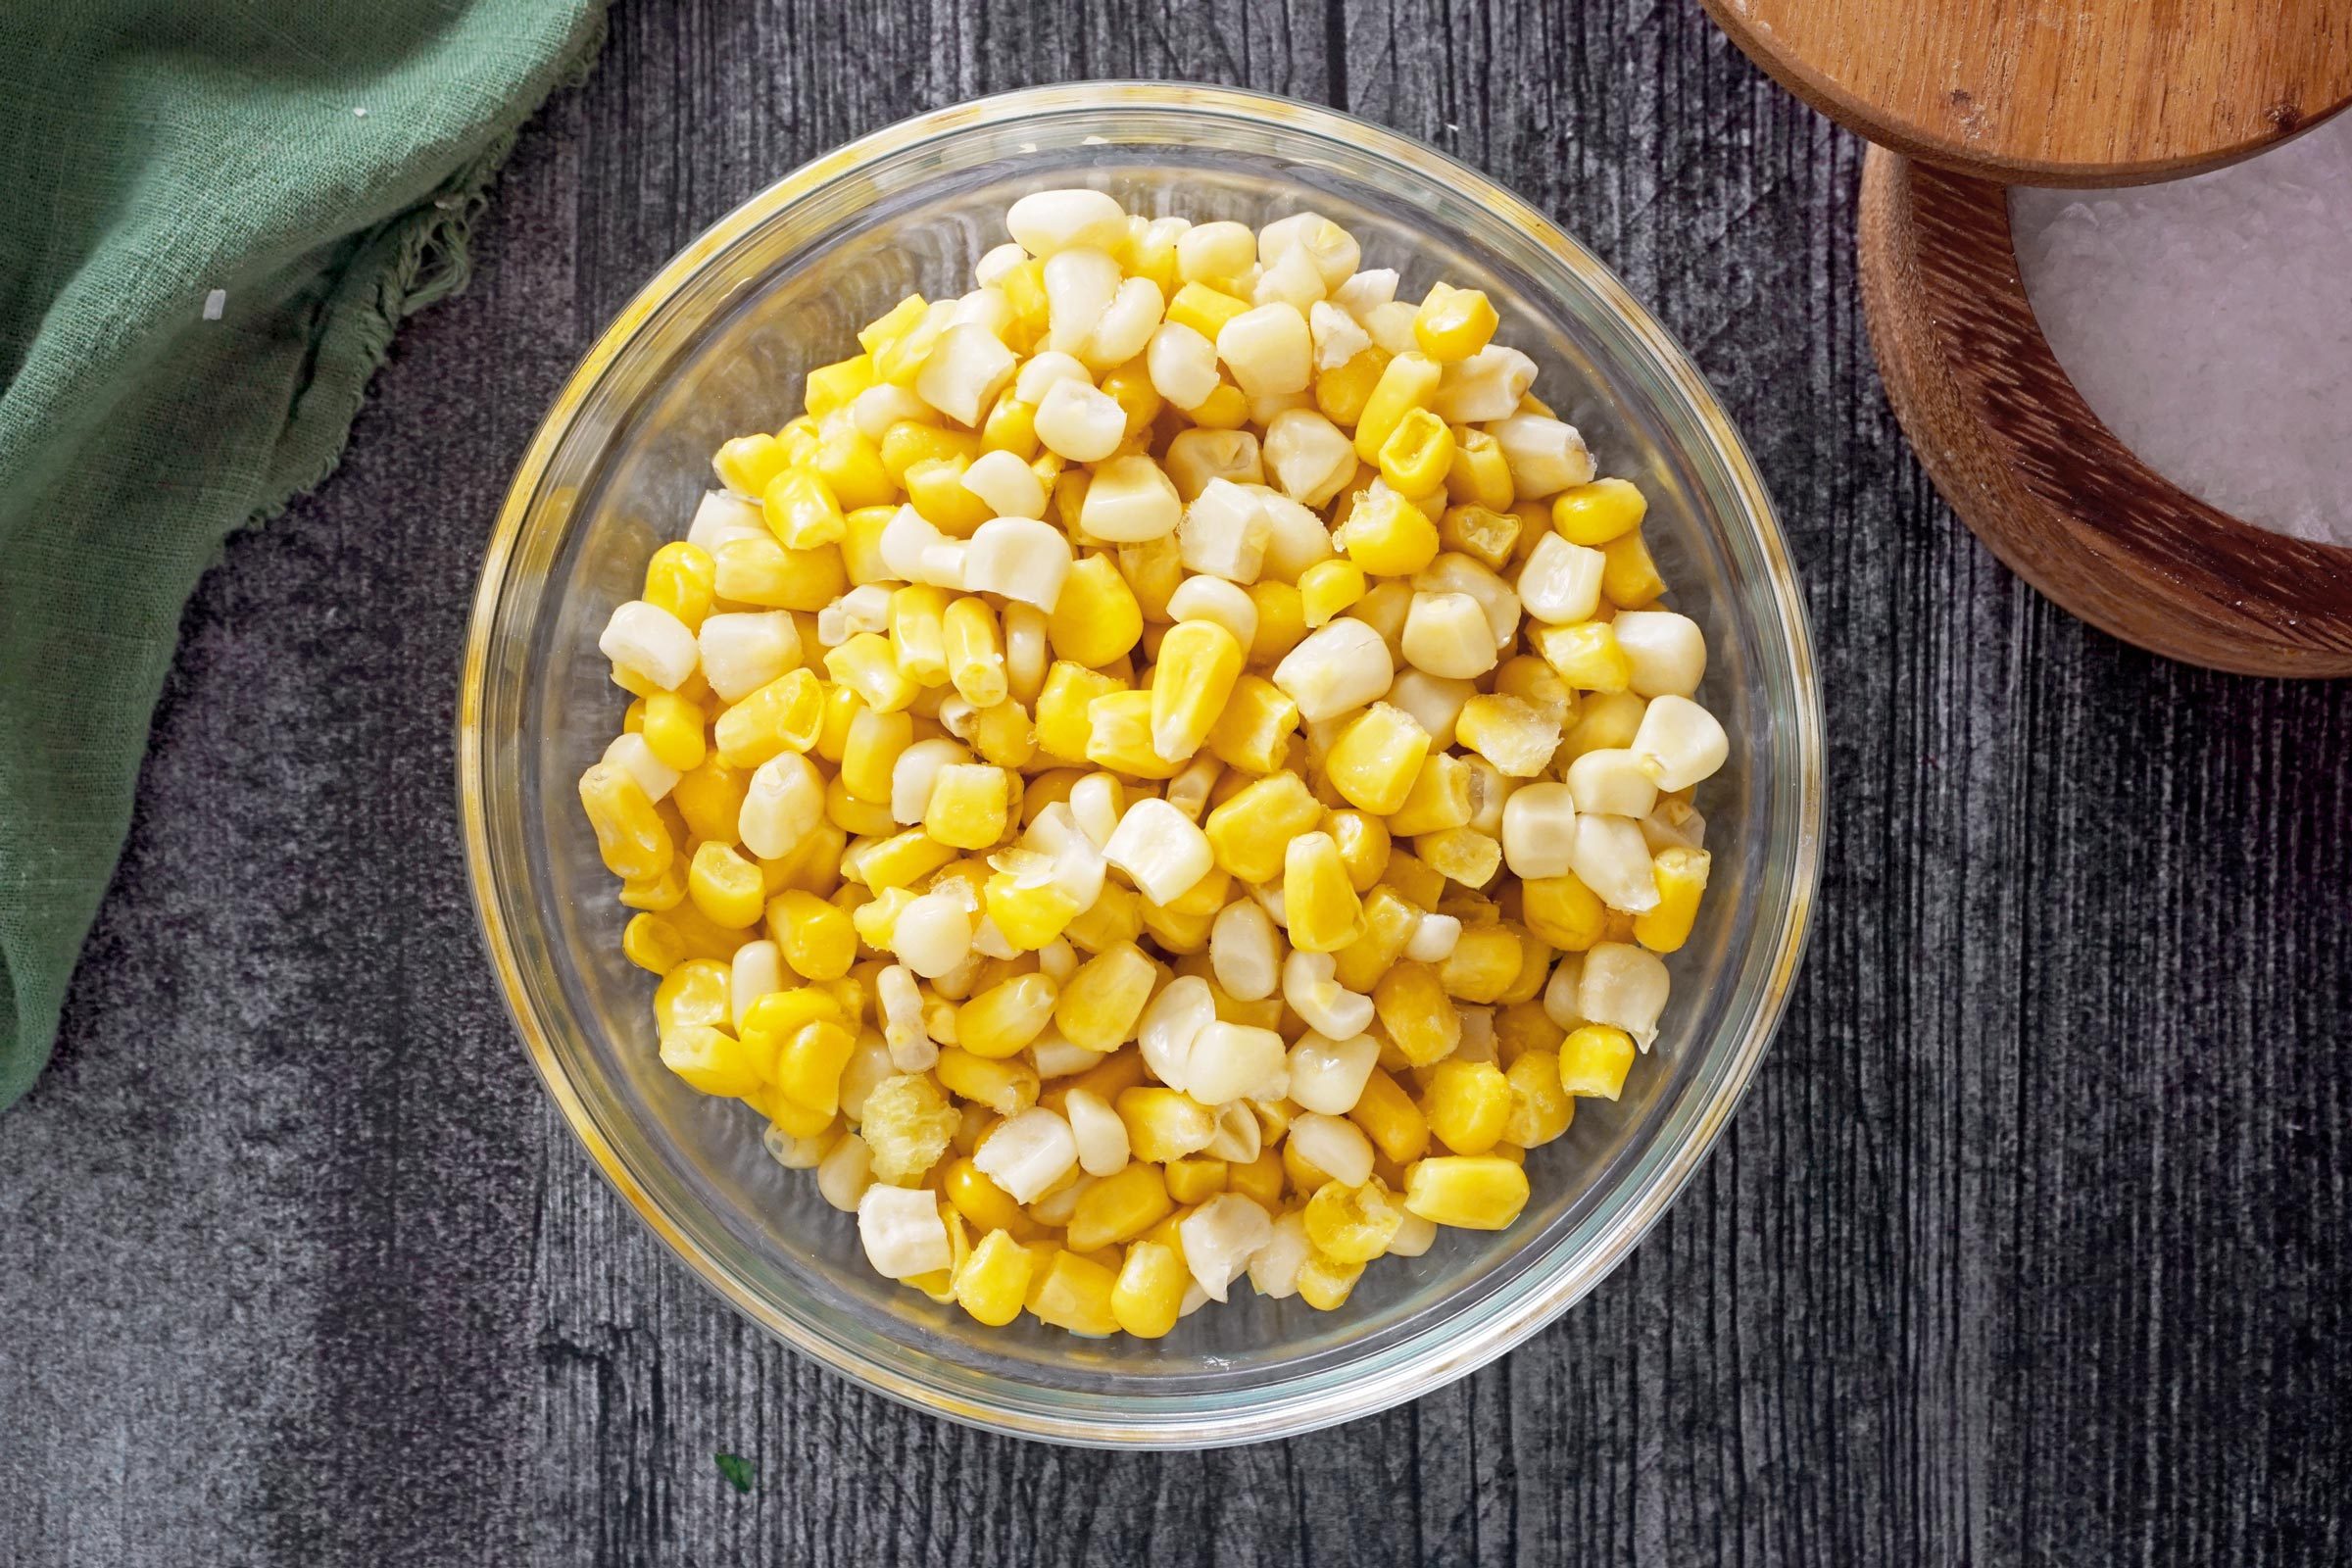 corn kernnels in a clear glass bowl on a wooden countertop